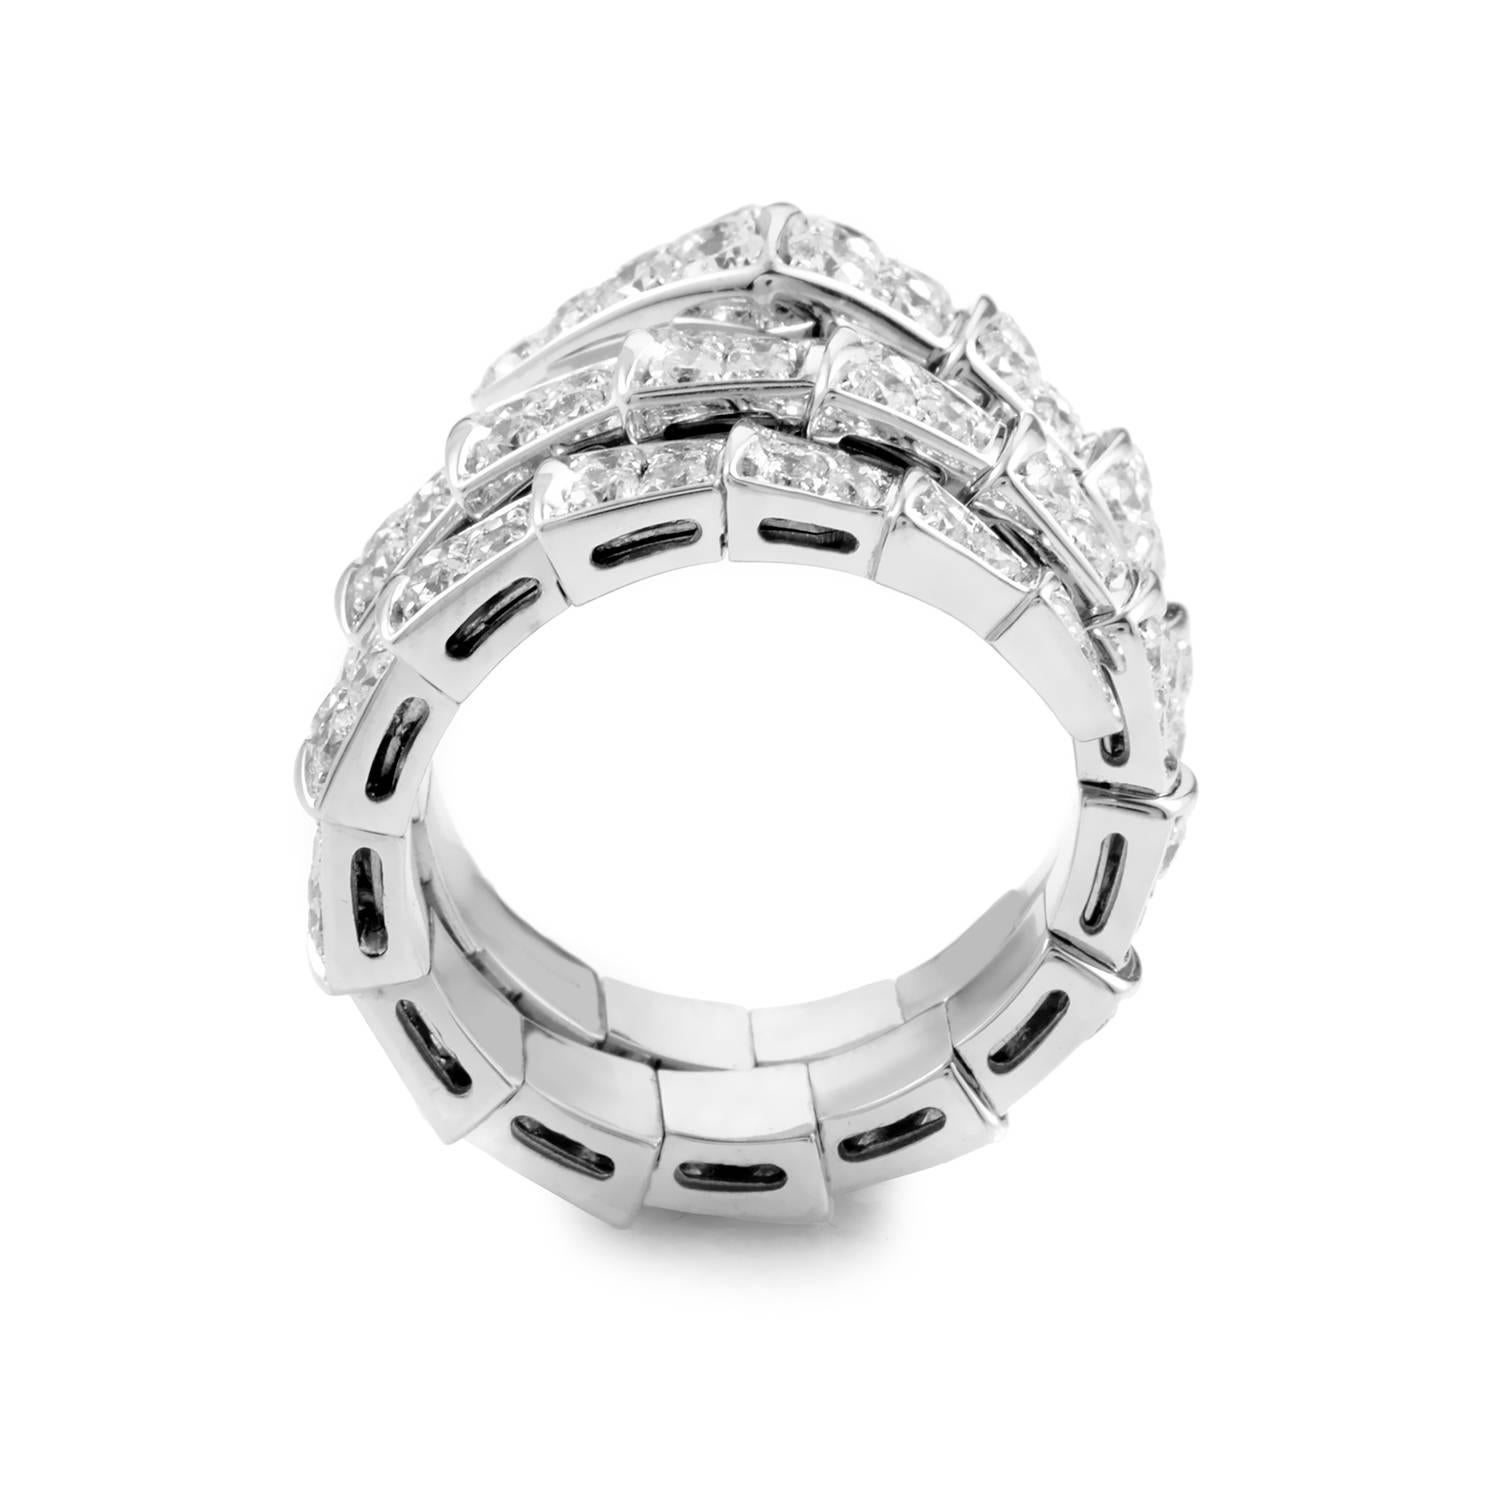 This bold and breathtaking design from Bulgari is for the lady that dares to be different. This ring from the Serpenti collection is made of 18K white gold and boasts a sumptuous full 2.90ct diamond pave. Absolutely breathtaking!
Included Items: